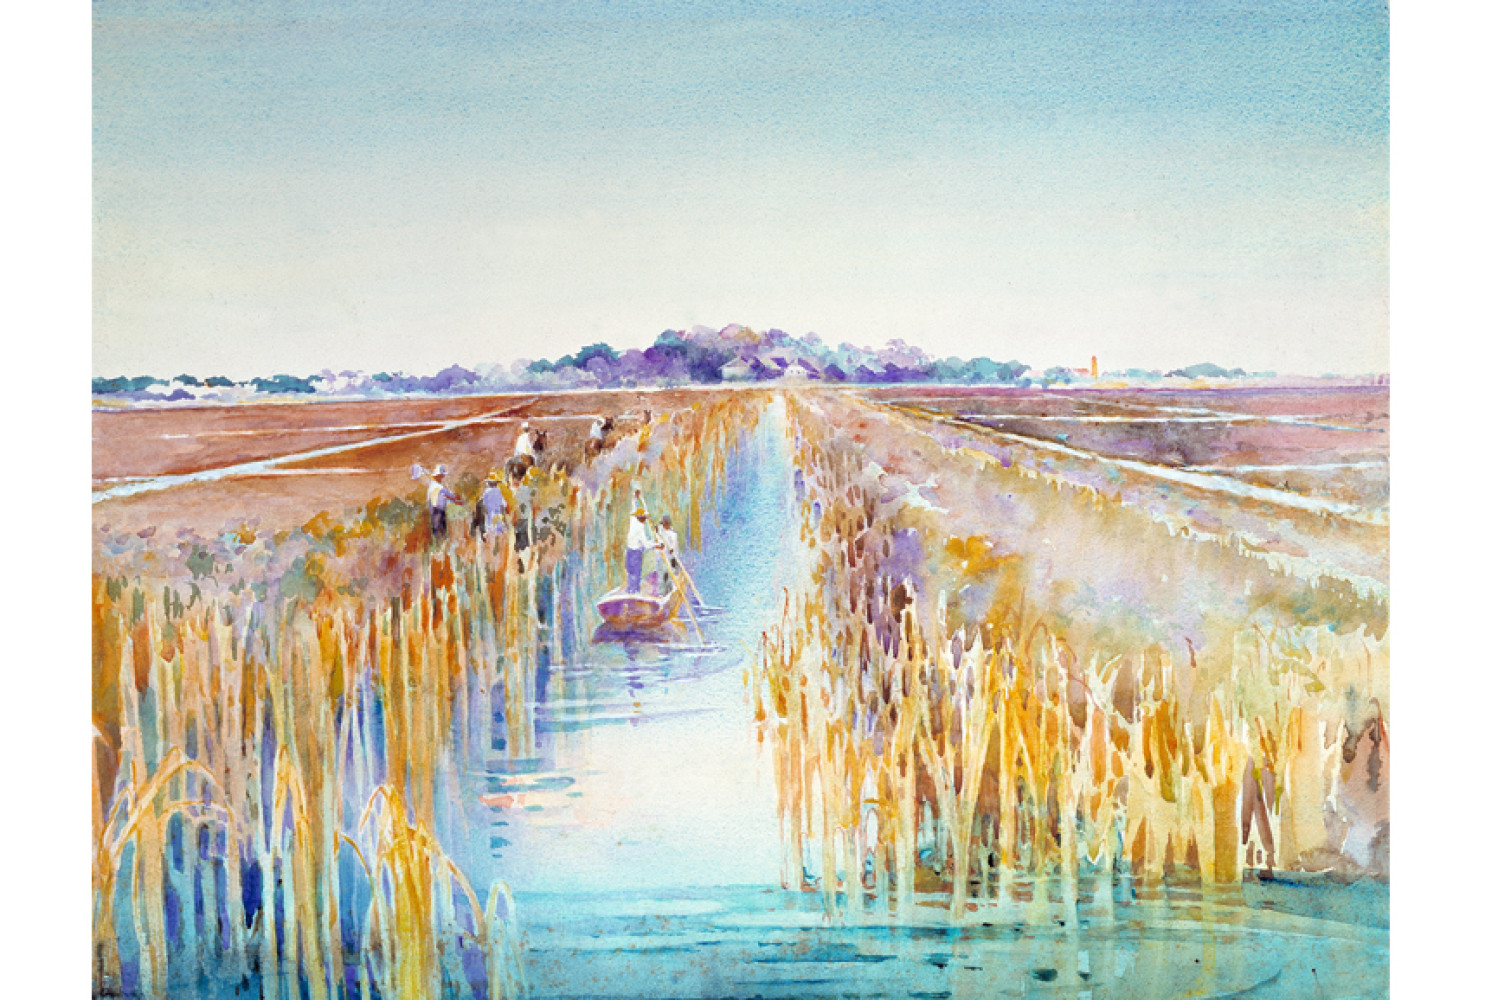 Fields Prepared for Planting from the series A Carolina Rice Plantation of the Fifties, ca. 1935, by Alice Ravenel Huger Smith (American, 1876 - 1958); watercolor on paper; 17 1/2  x 21 7/8 inches; Gift of the artist; 1937.009.0010